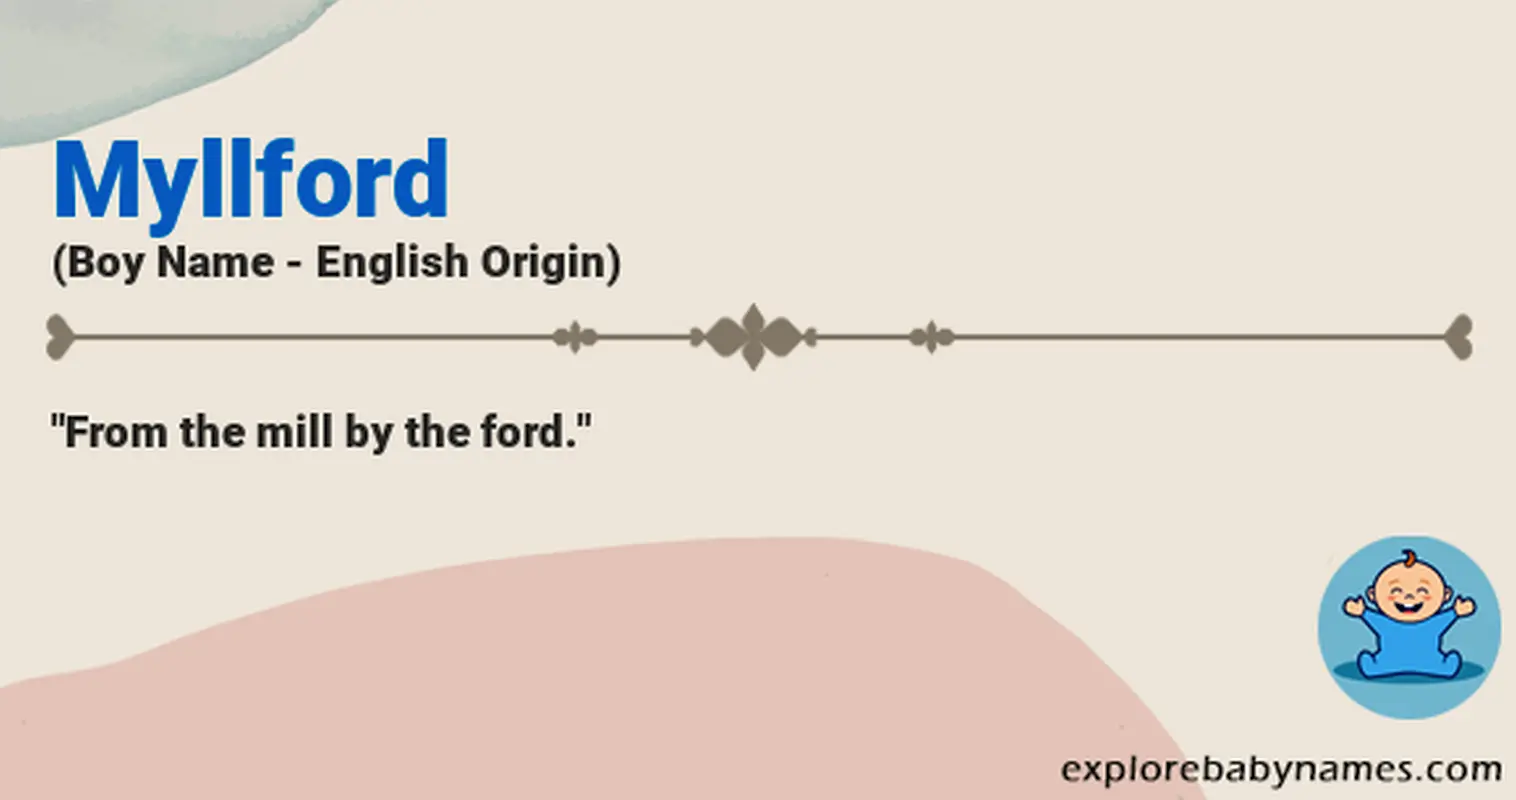 Meaning of Myllford